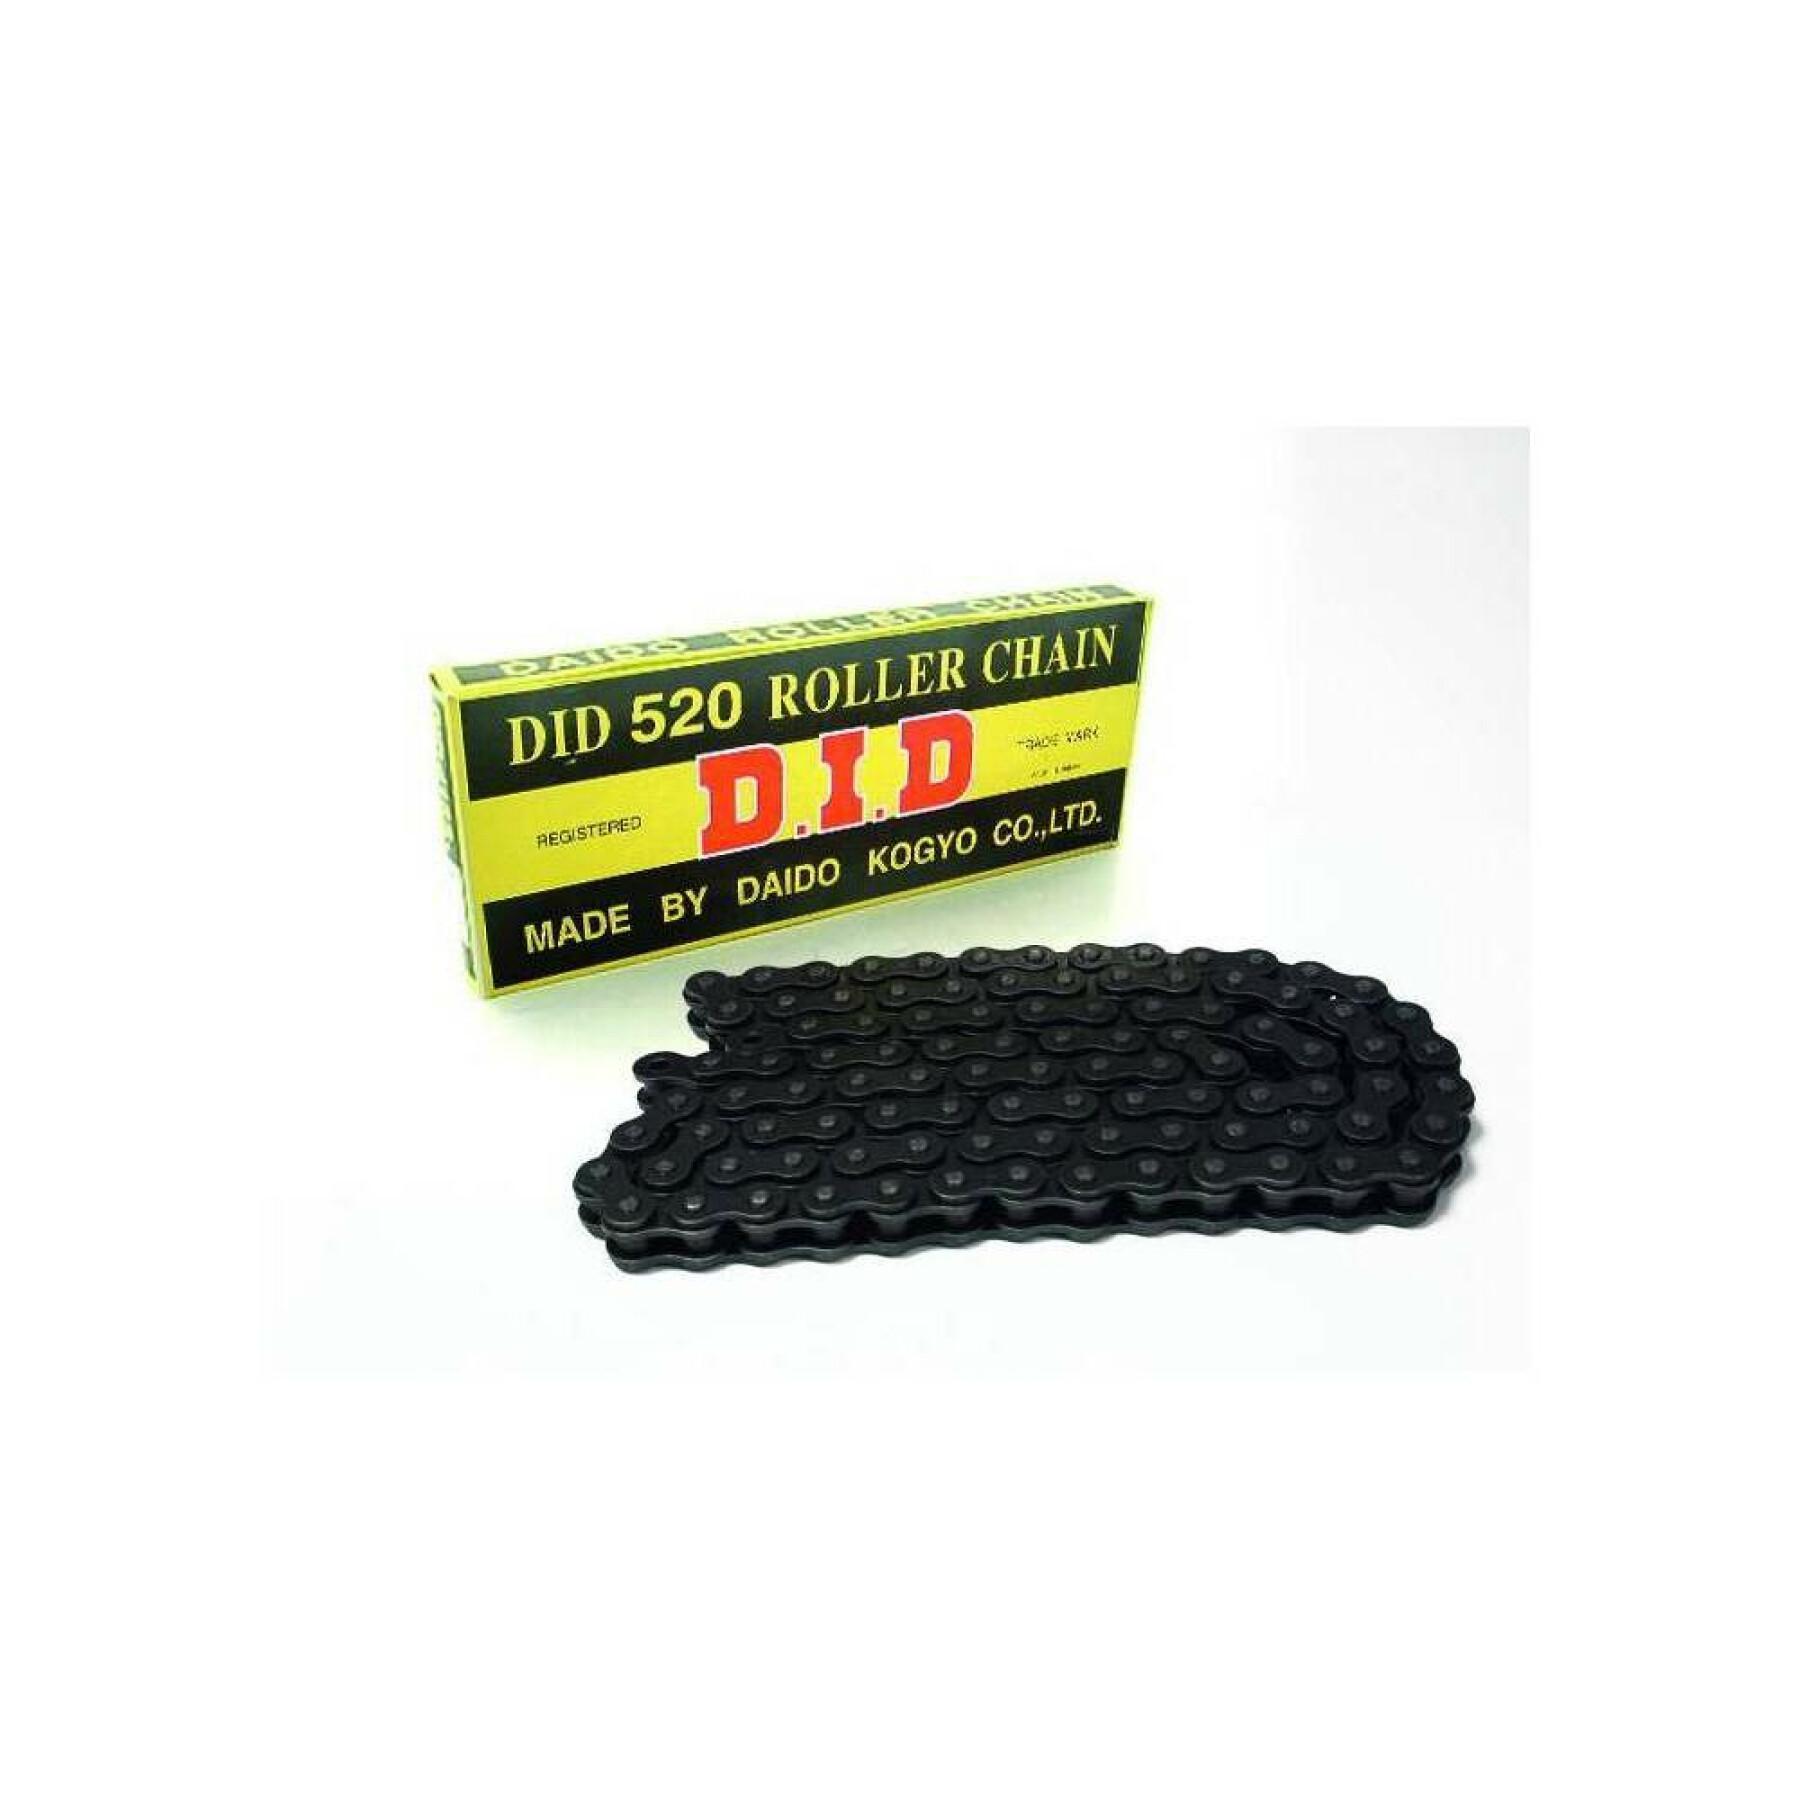 Motorcycle roller chain D.I.D 520(B&B) X 112 Mail. Rj